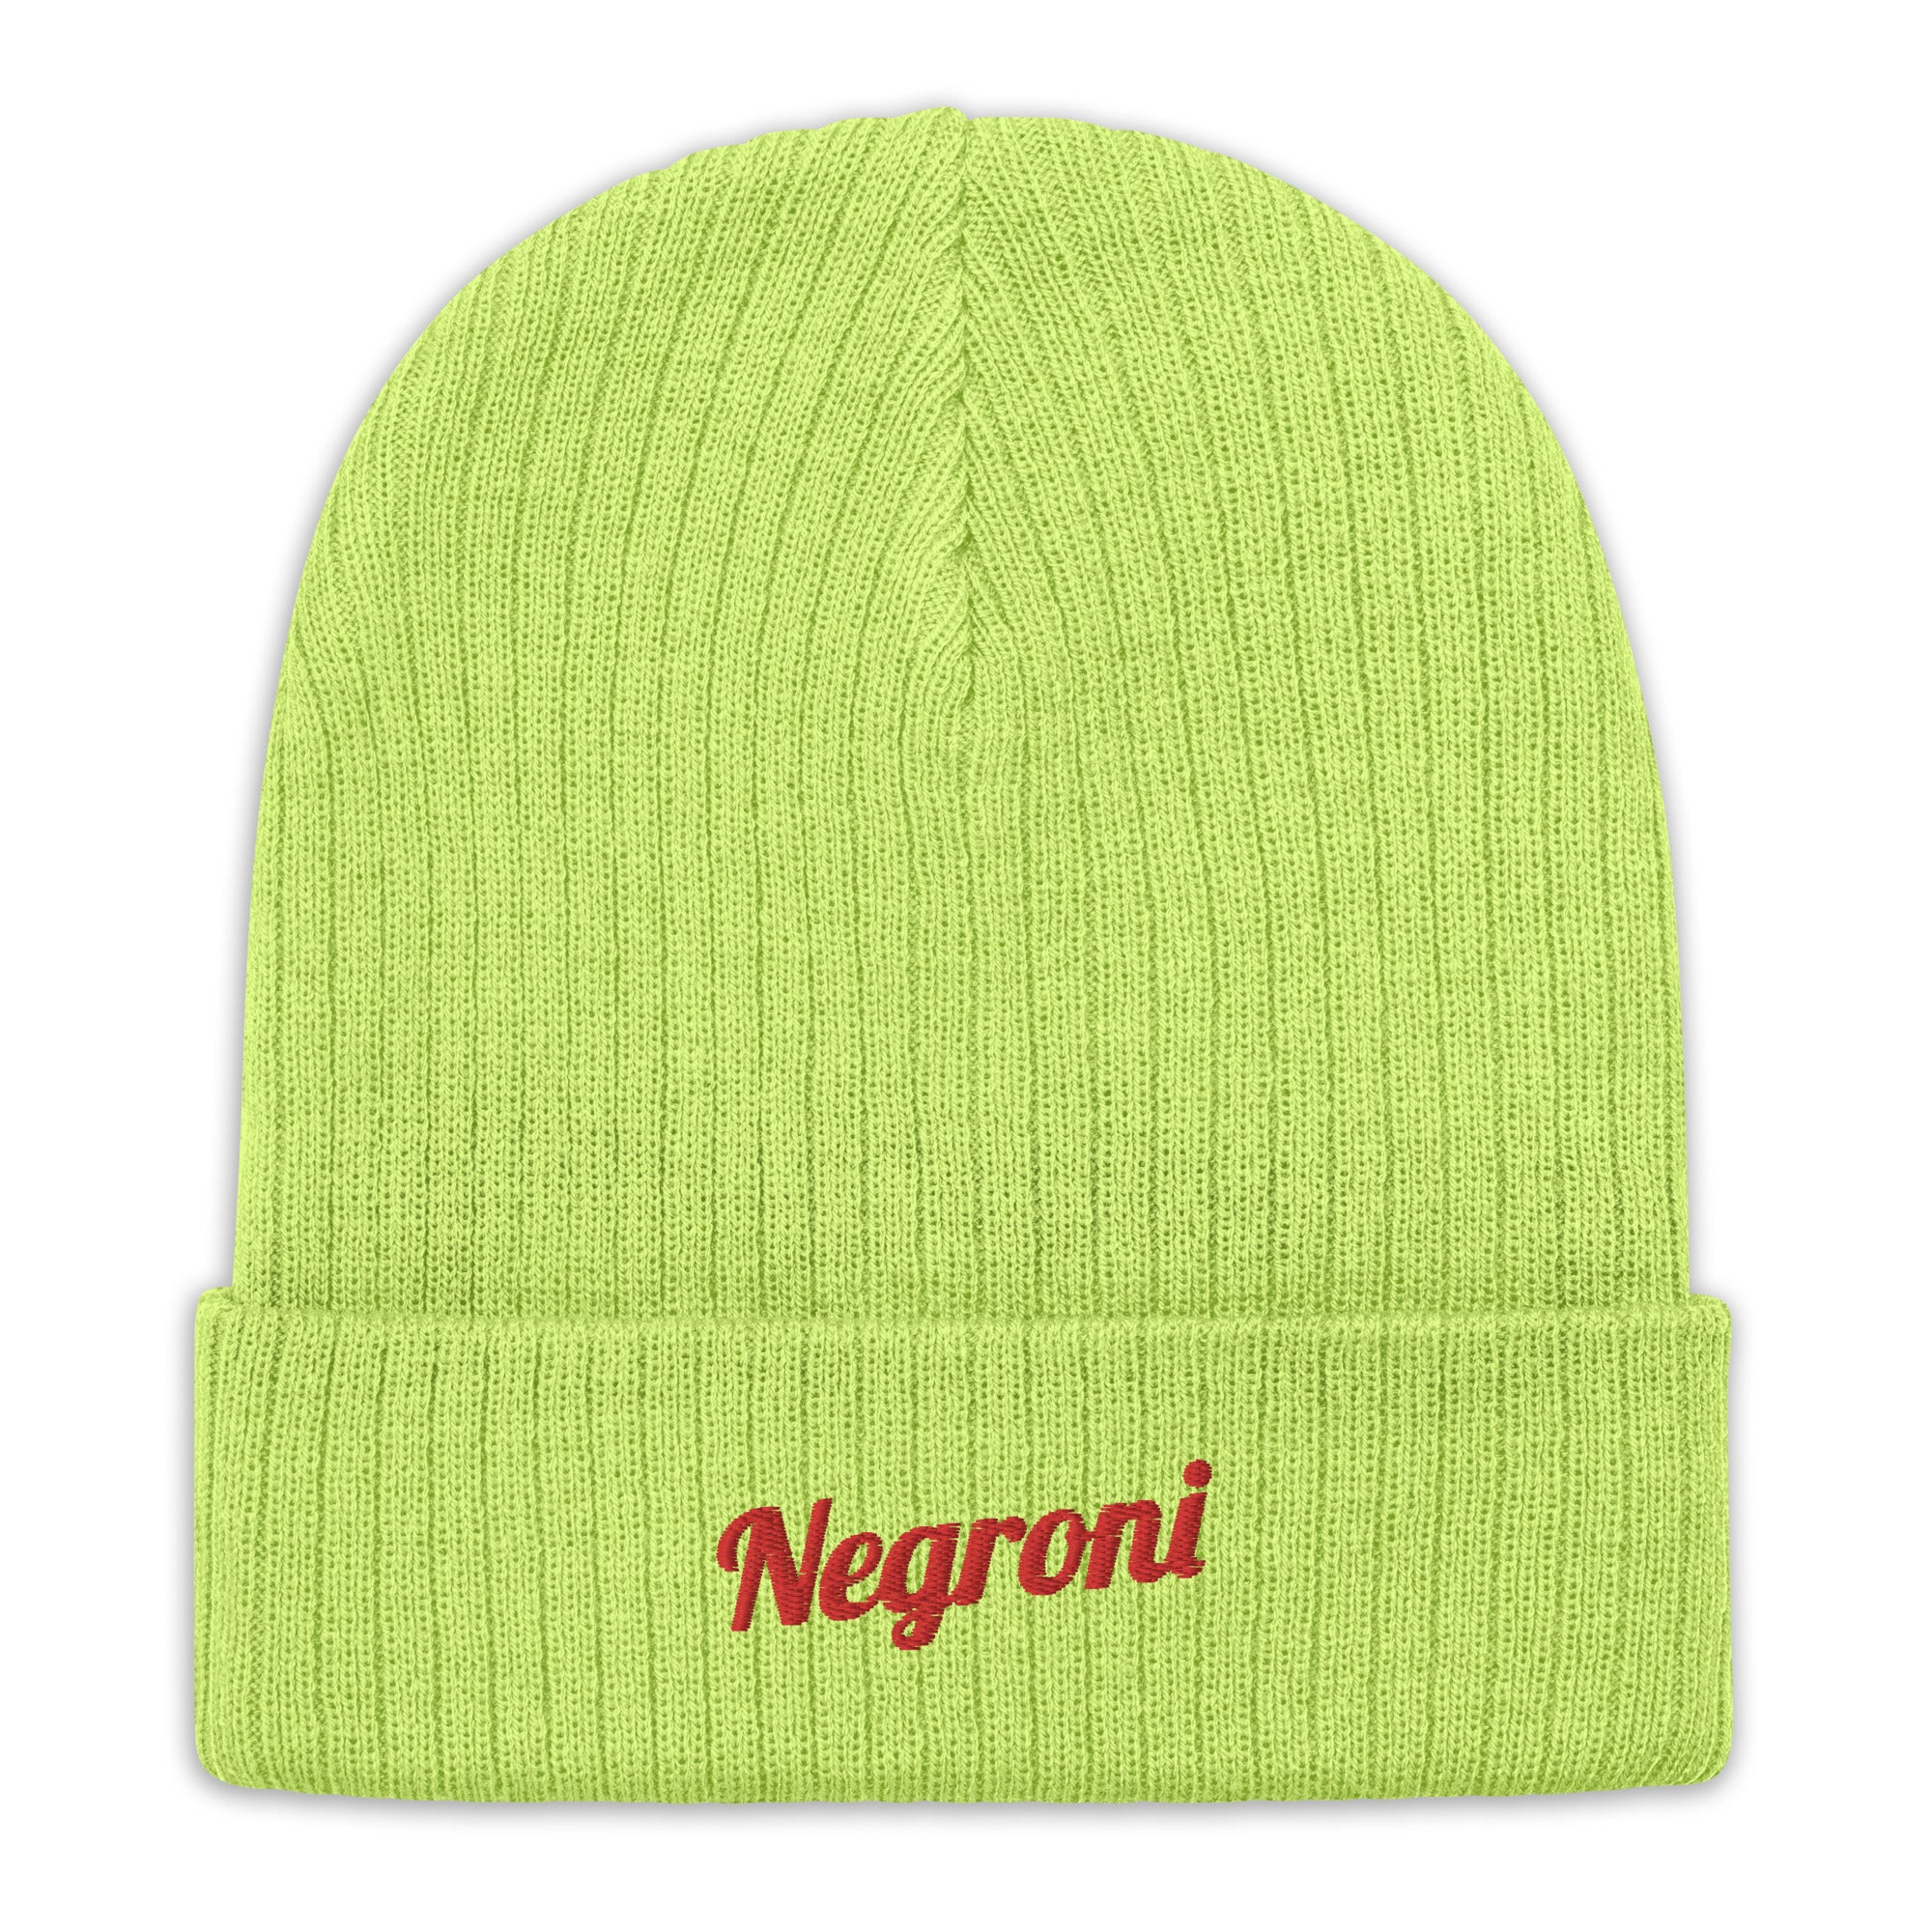 Negroni - Recycled Embroidered Beanie